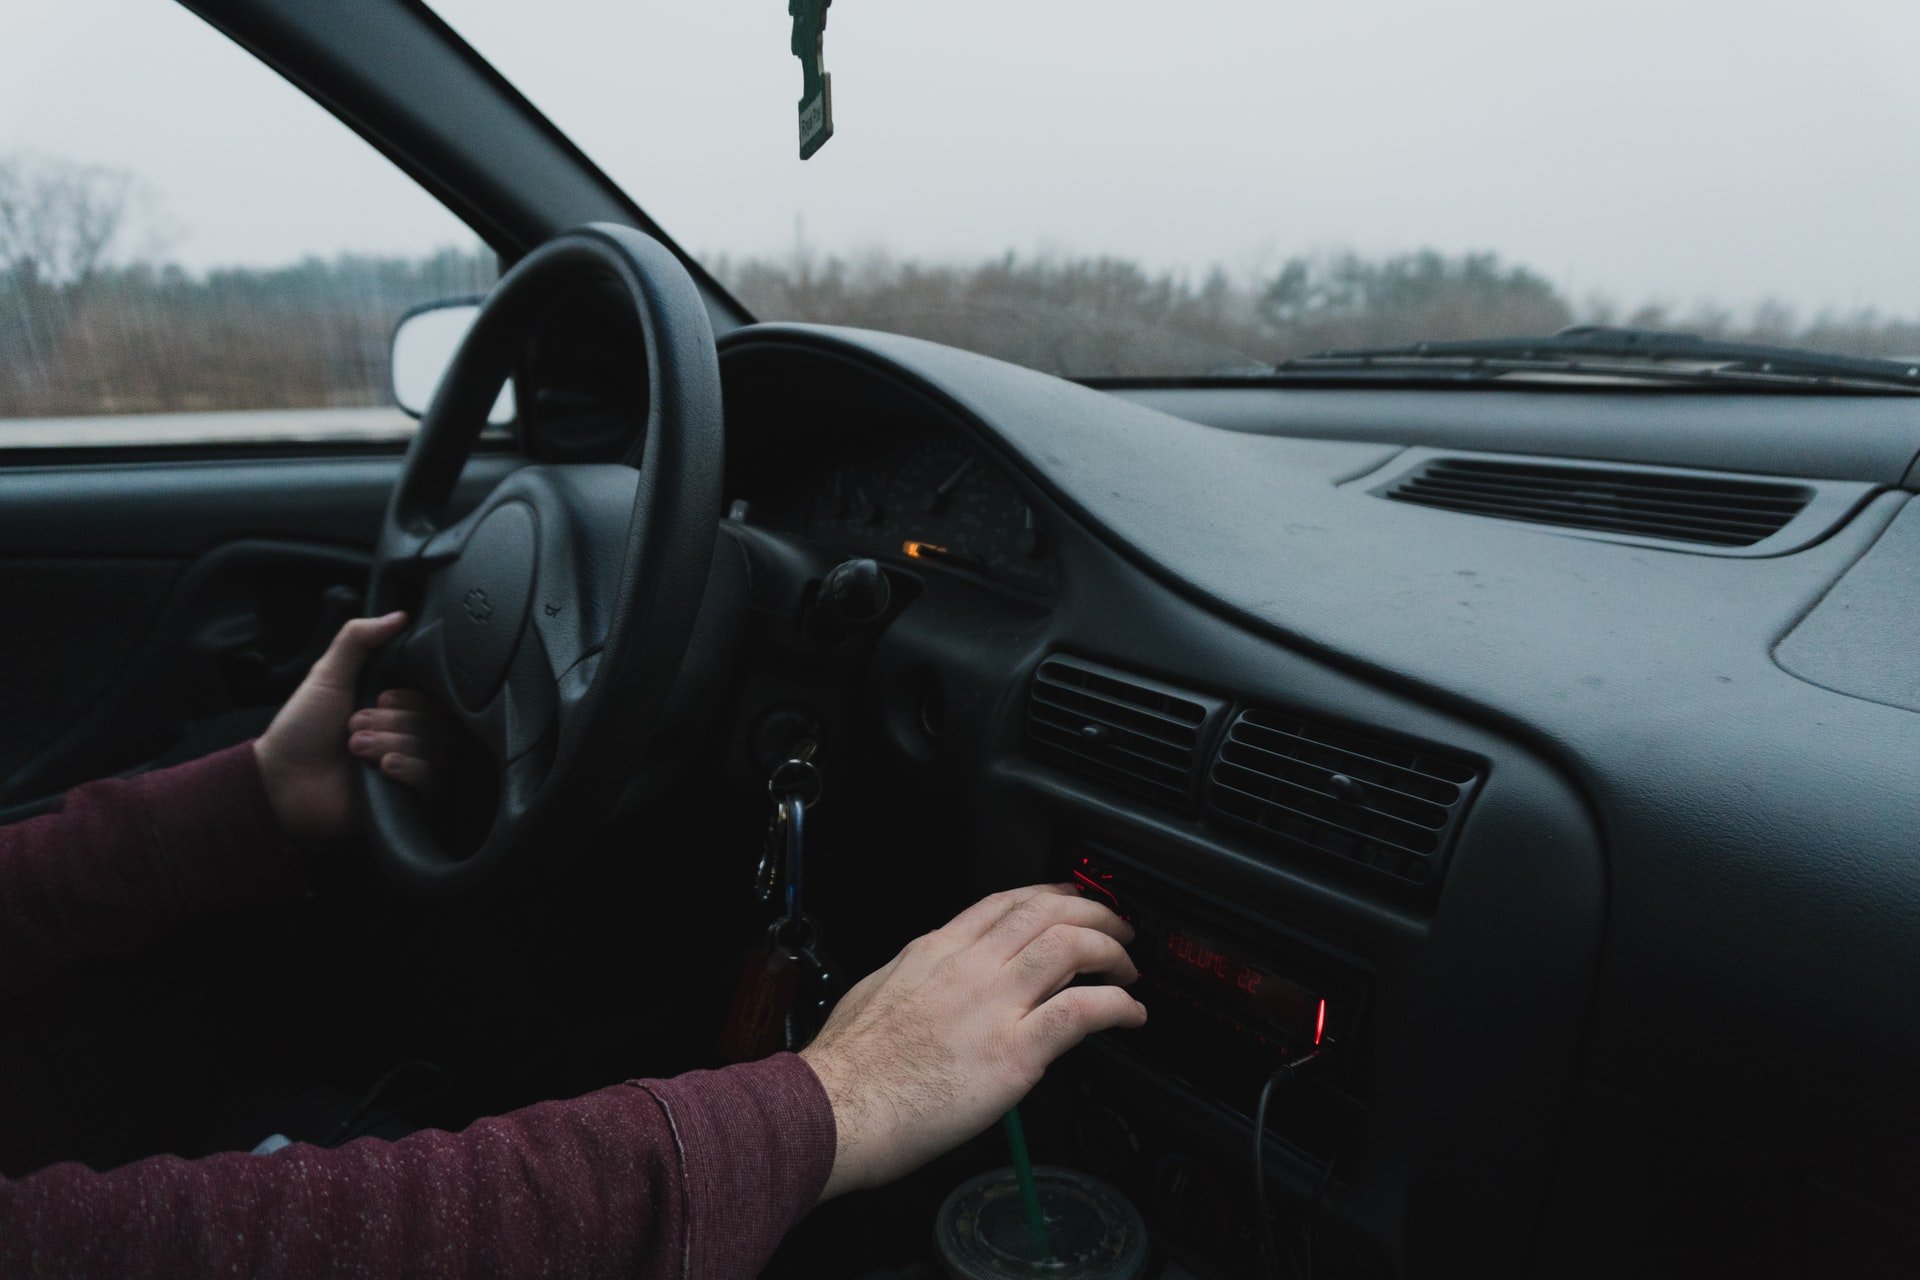 He drove to his friend's house. | Source: Unsplash